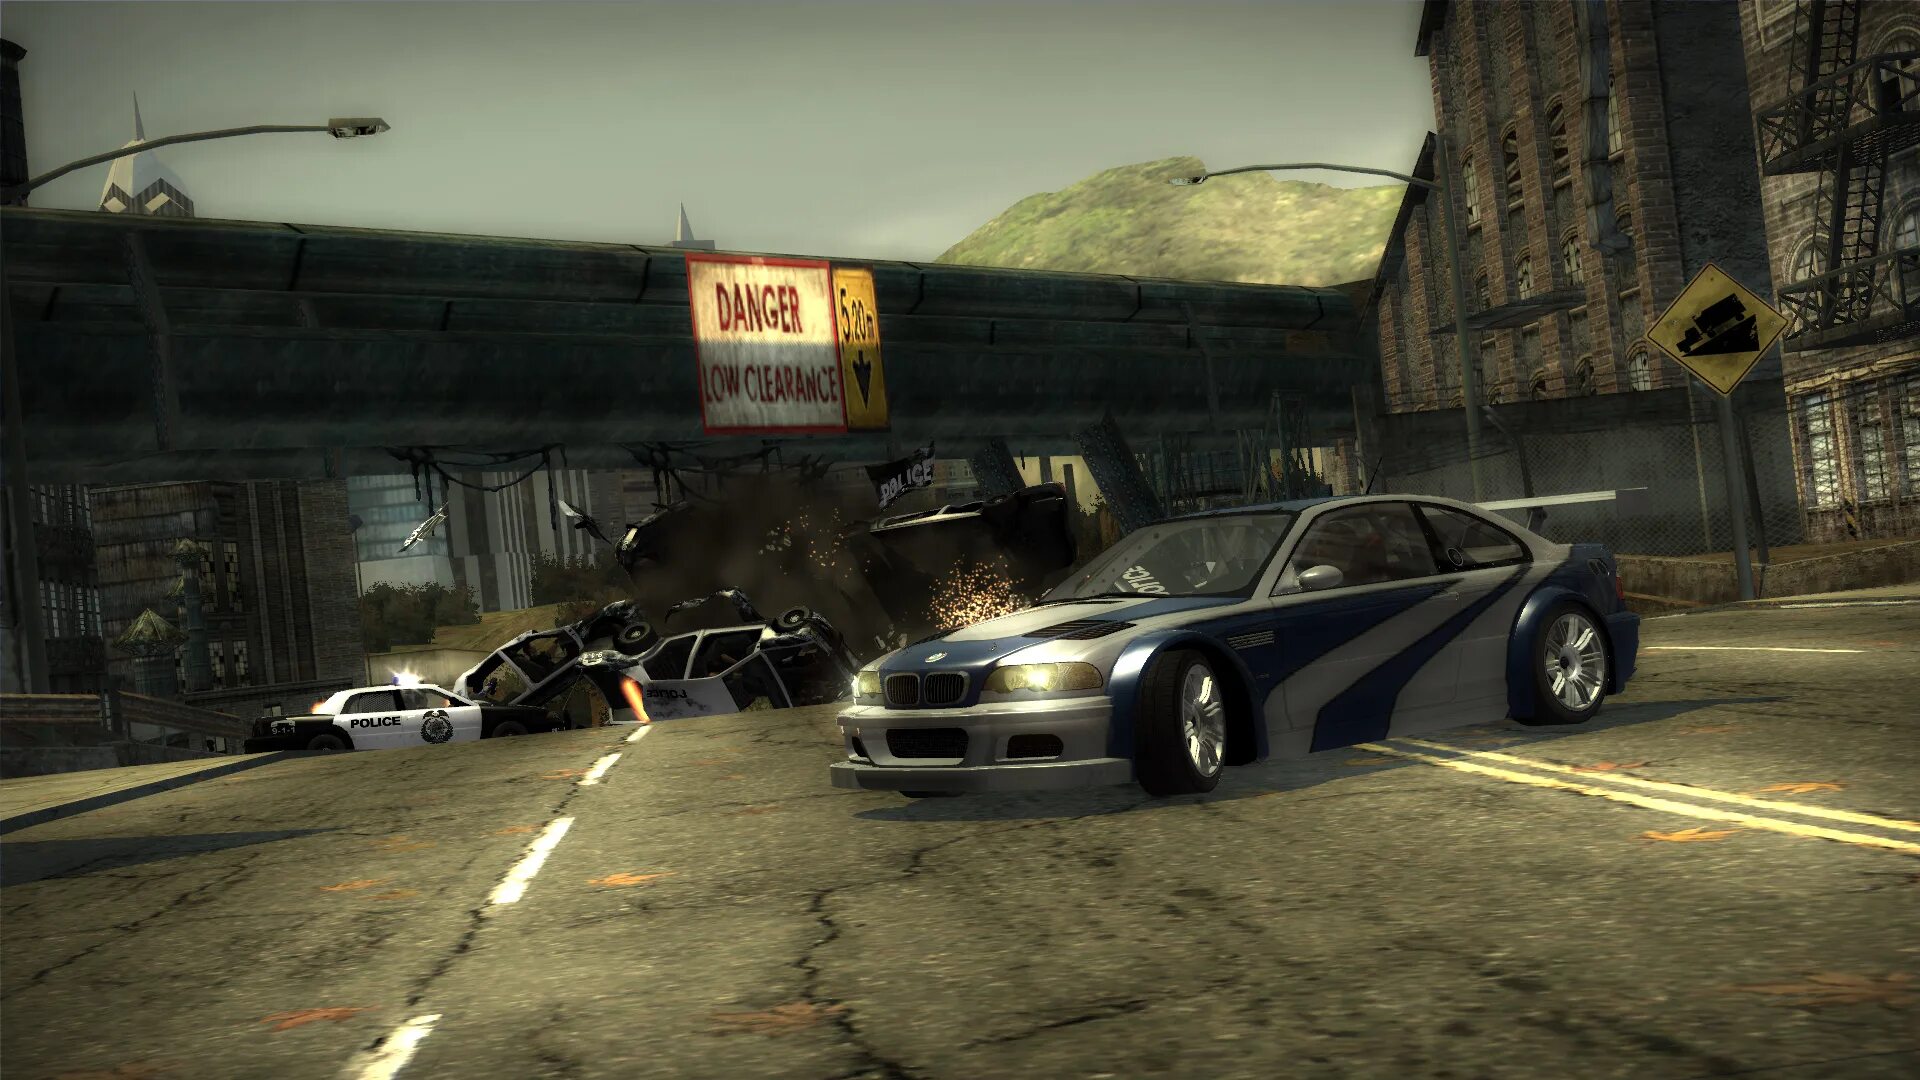 Бета NFS MW 2005. Гонки NFS most wanted 2005. NFS MW 2005 ps2. Новый NFS most wanted 2005. Nfs mw 2